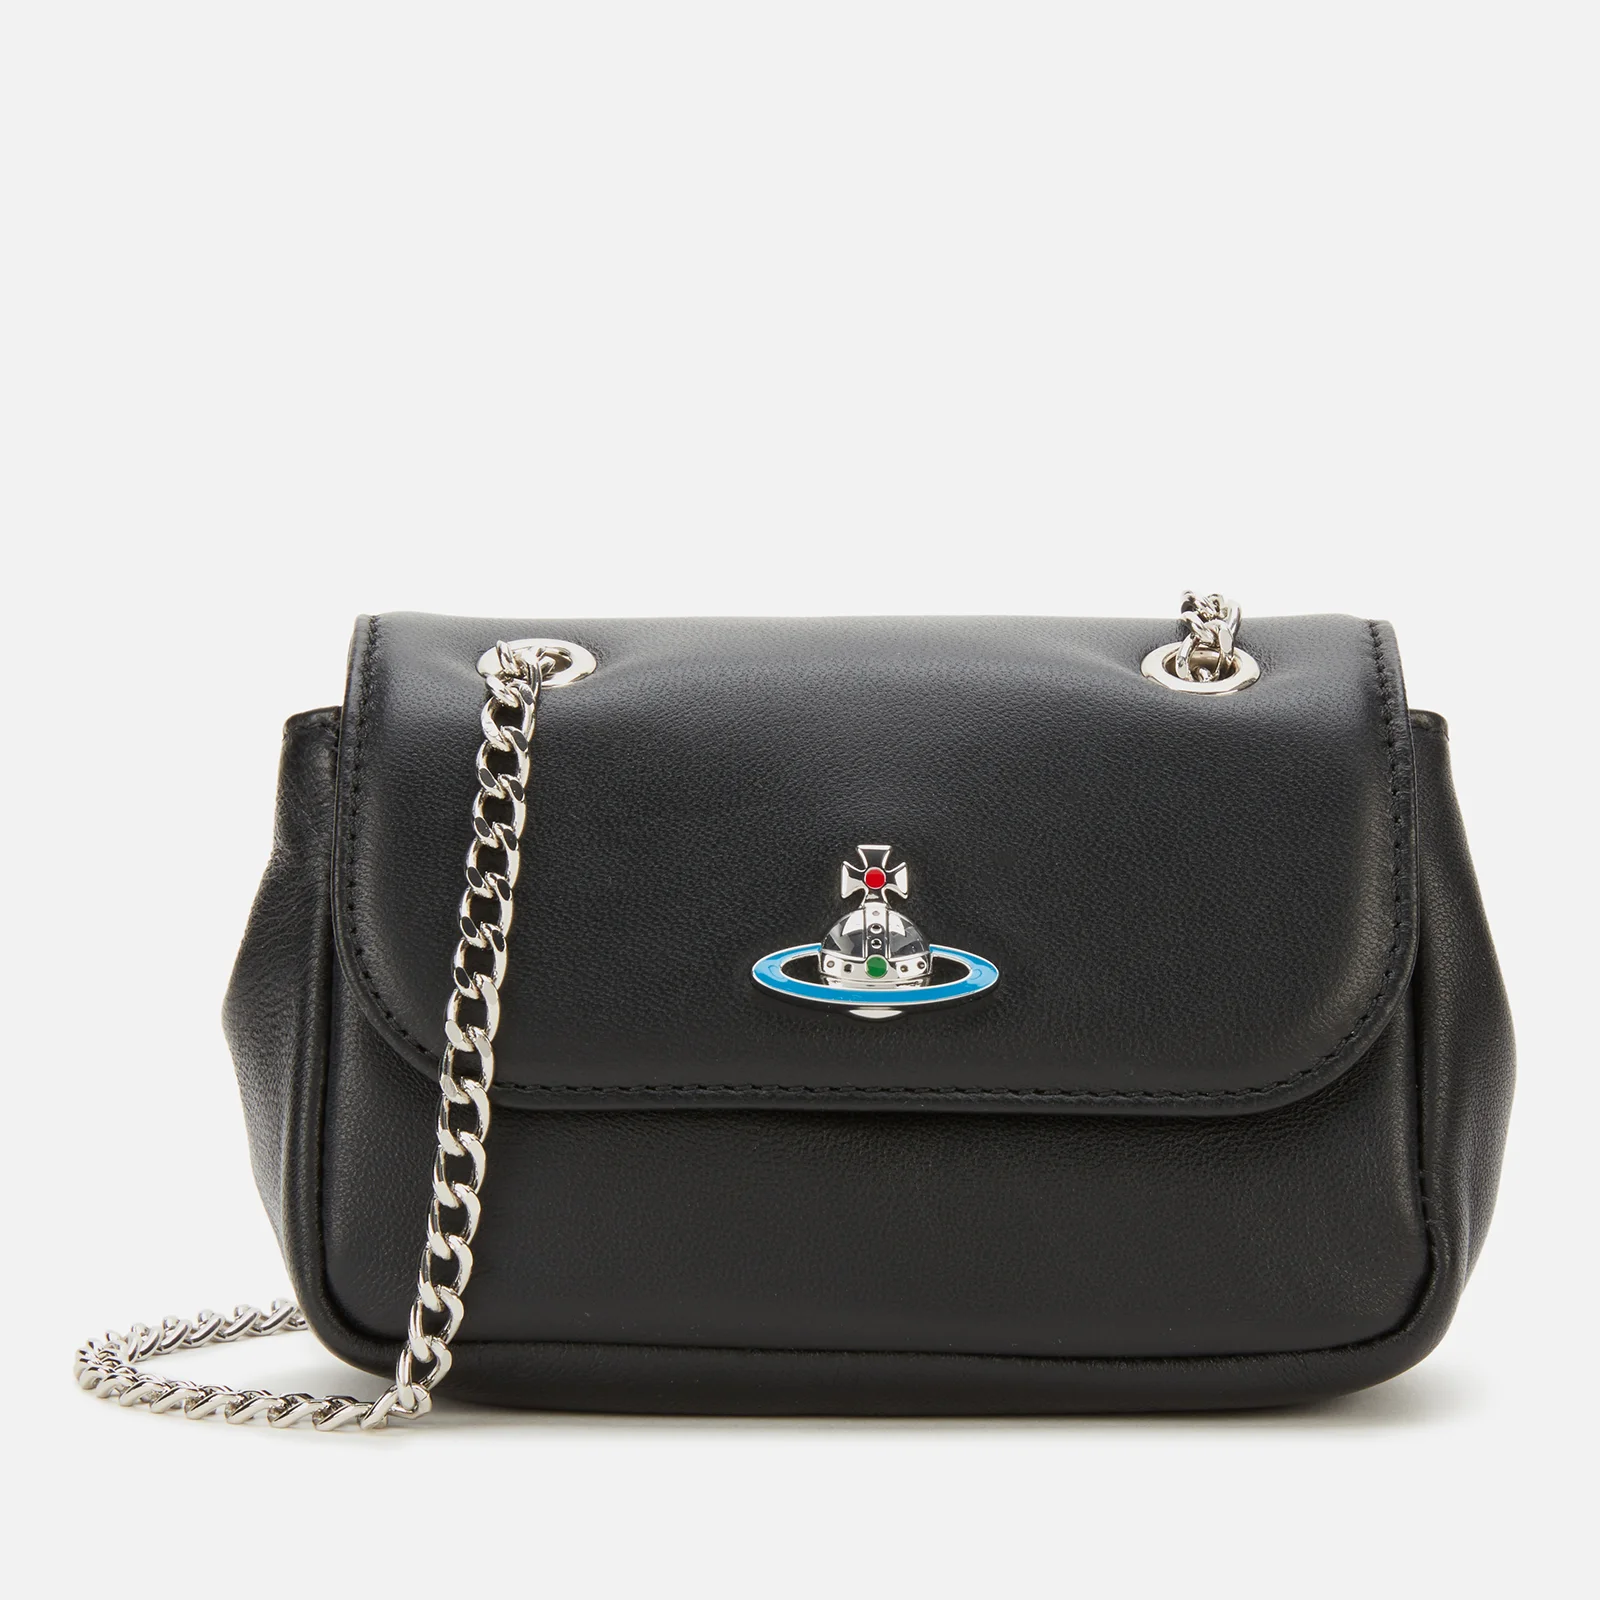 Vivienne Westwood Women's Emma Small Purse with Chain - Black Image 1